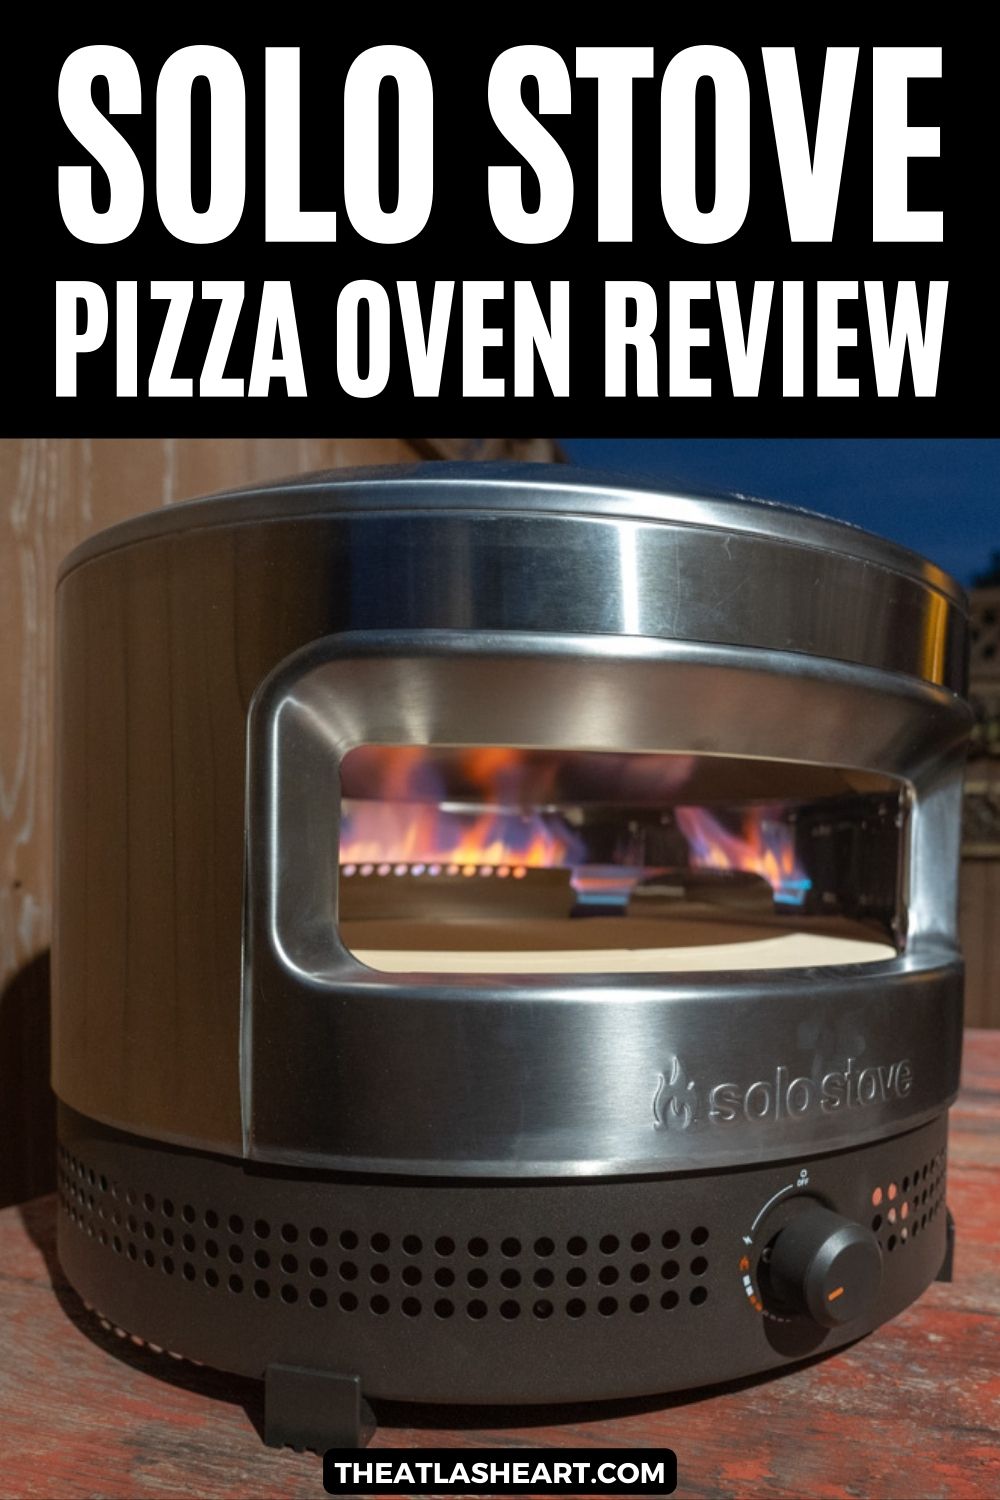 Flames visible inside a Pi Prime Pizza Oven sitting on a wooden table in a backyard at dusk, with a brown fence behind it, and the text overlay, "Solo Stove Pizza Oven Review."